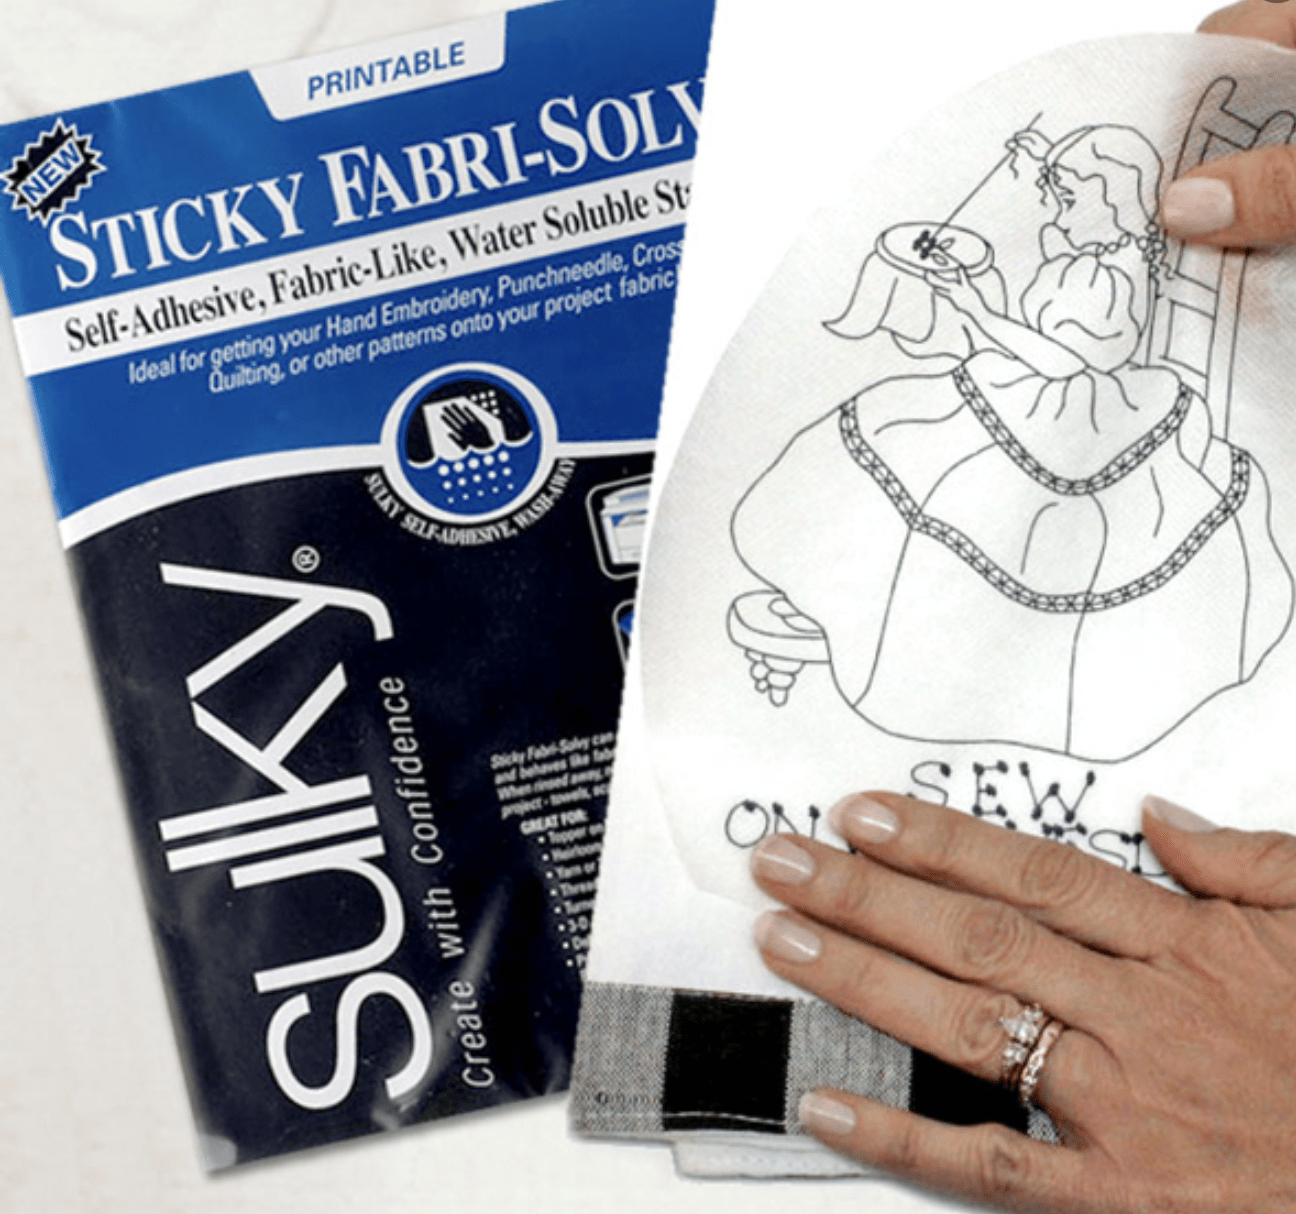 Removing Water Soluble Embroidery Stabilizer Topping / Solvy